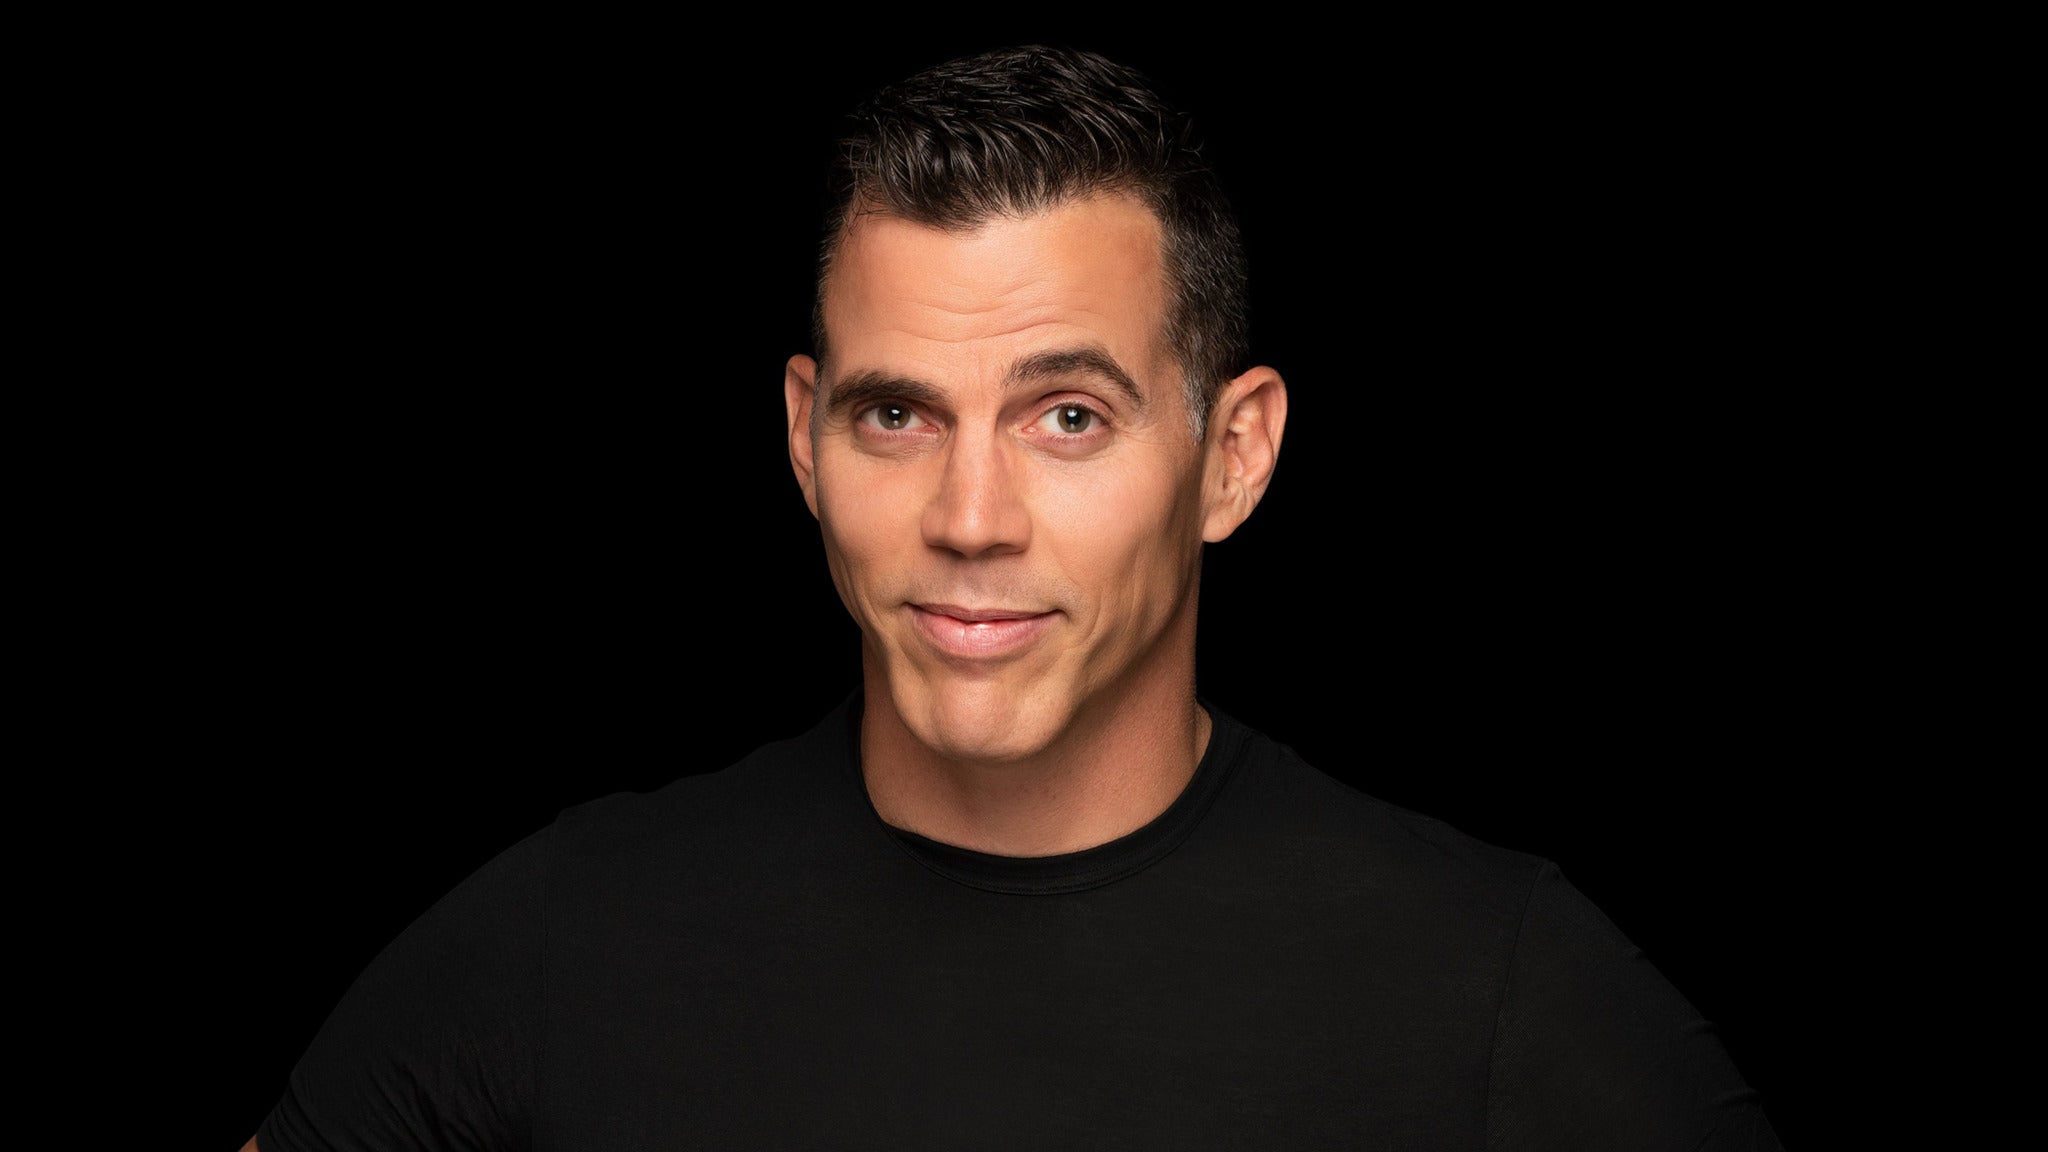 Steve-O's Bucket List Tour presale password for early tickets in Huntington